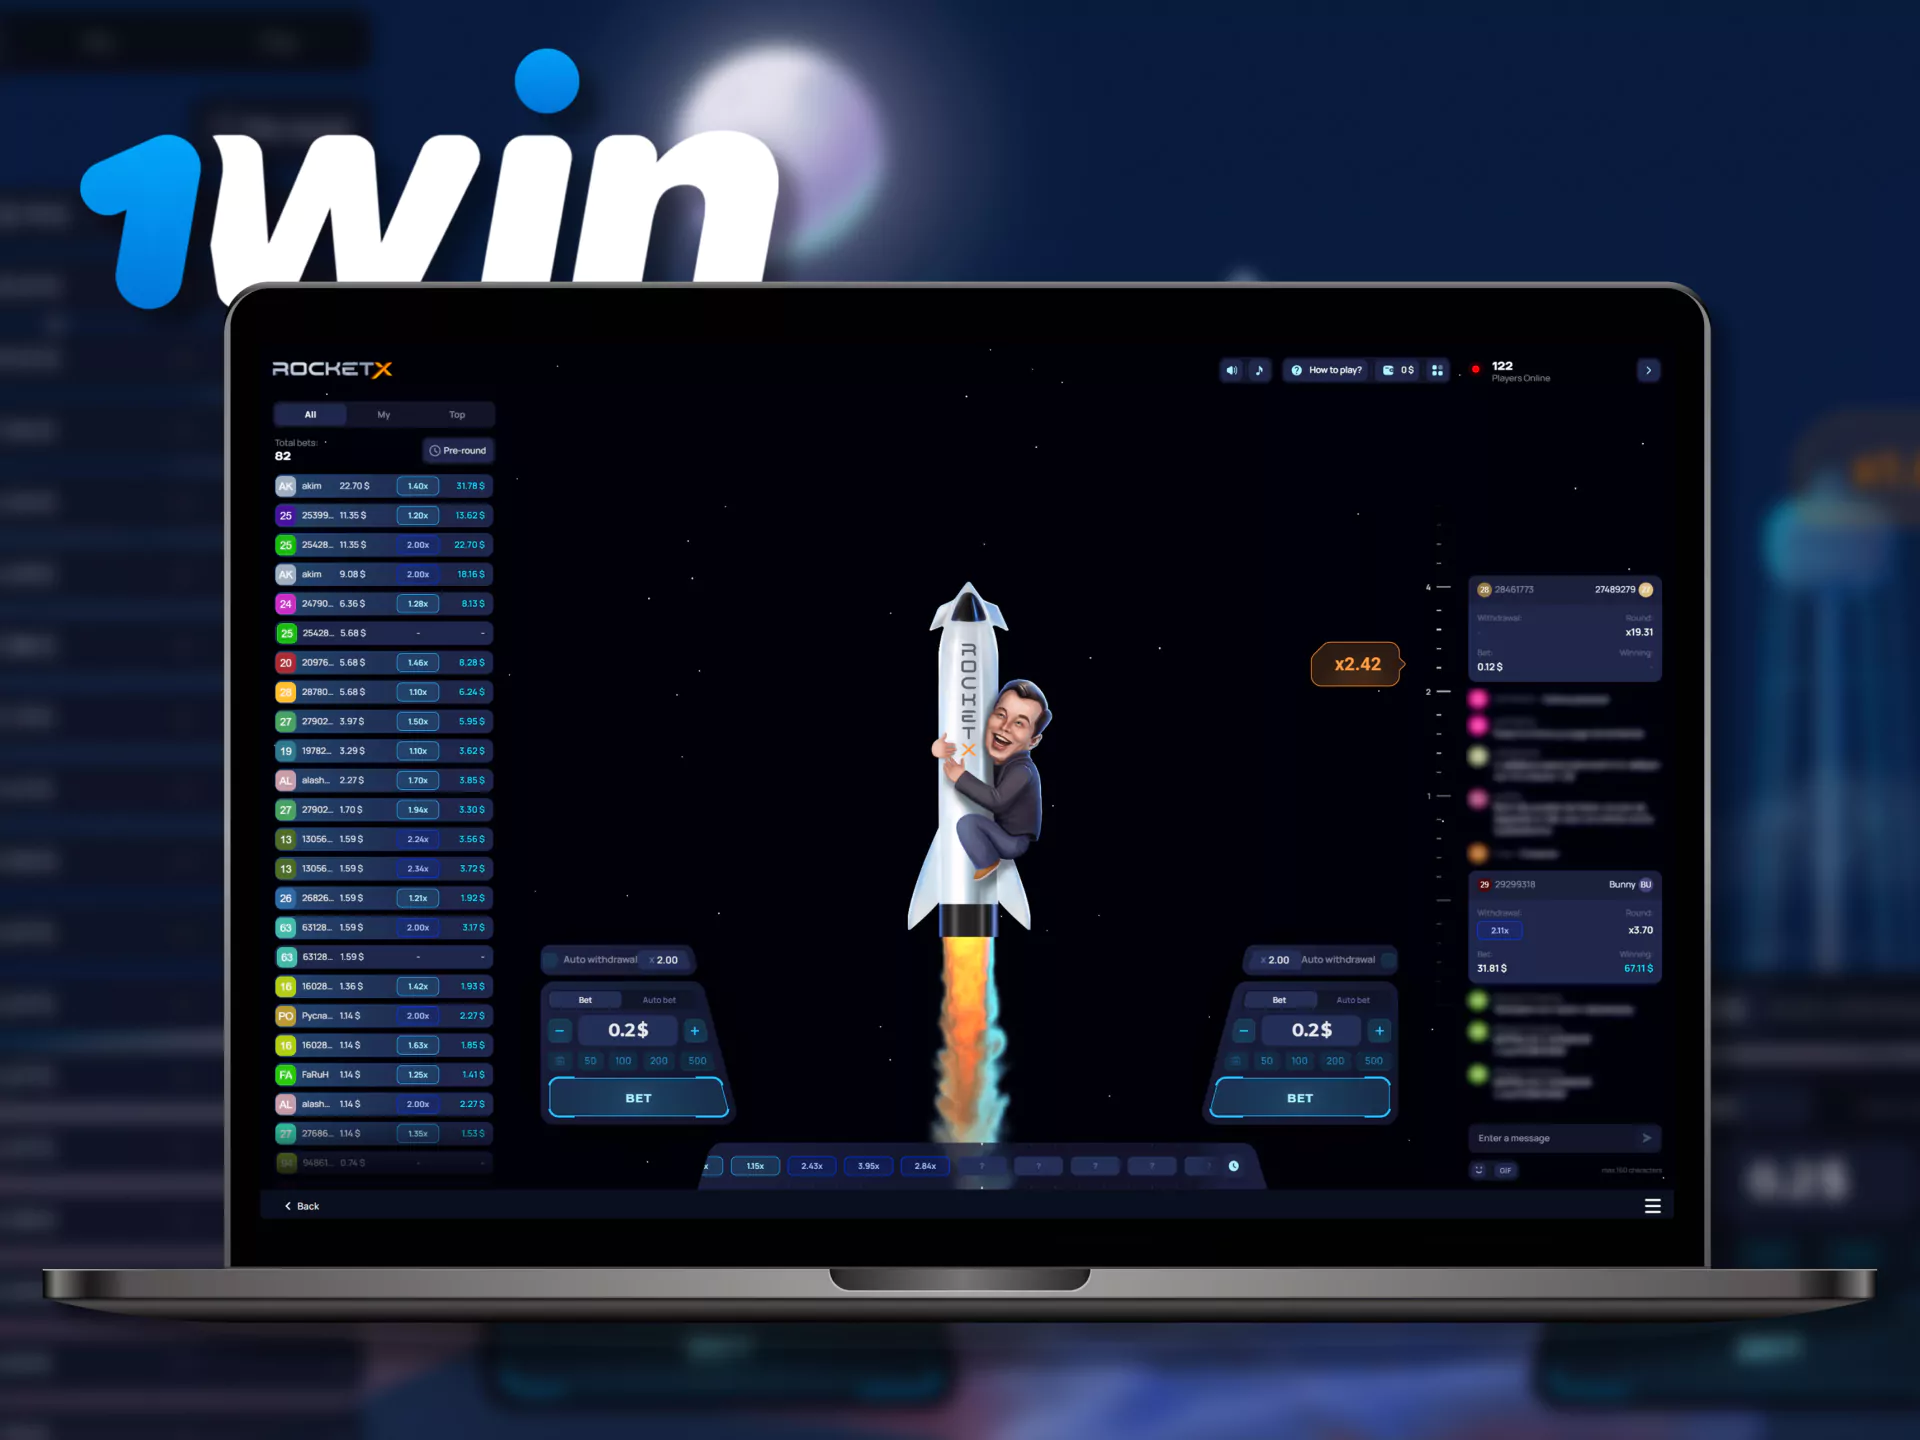 At 1win to play Rocket X try these strategies to win.